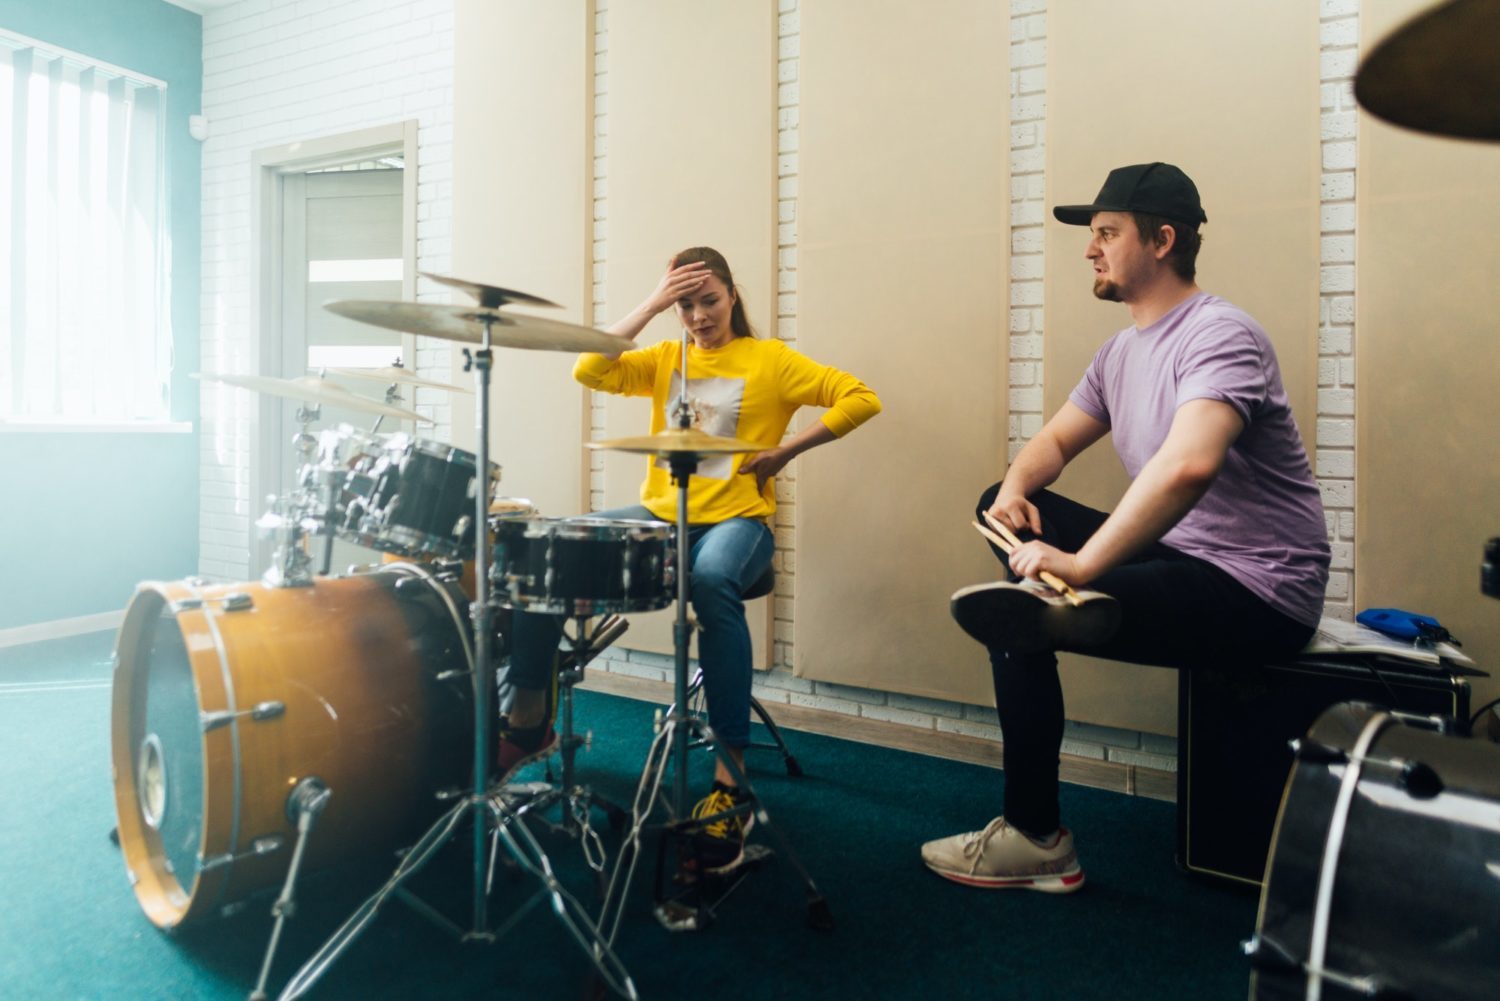 Young woman learning to play drums with teacher.